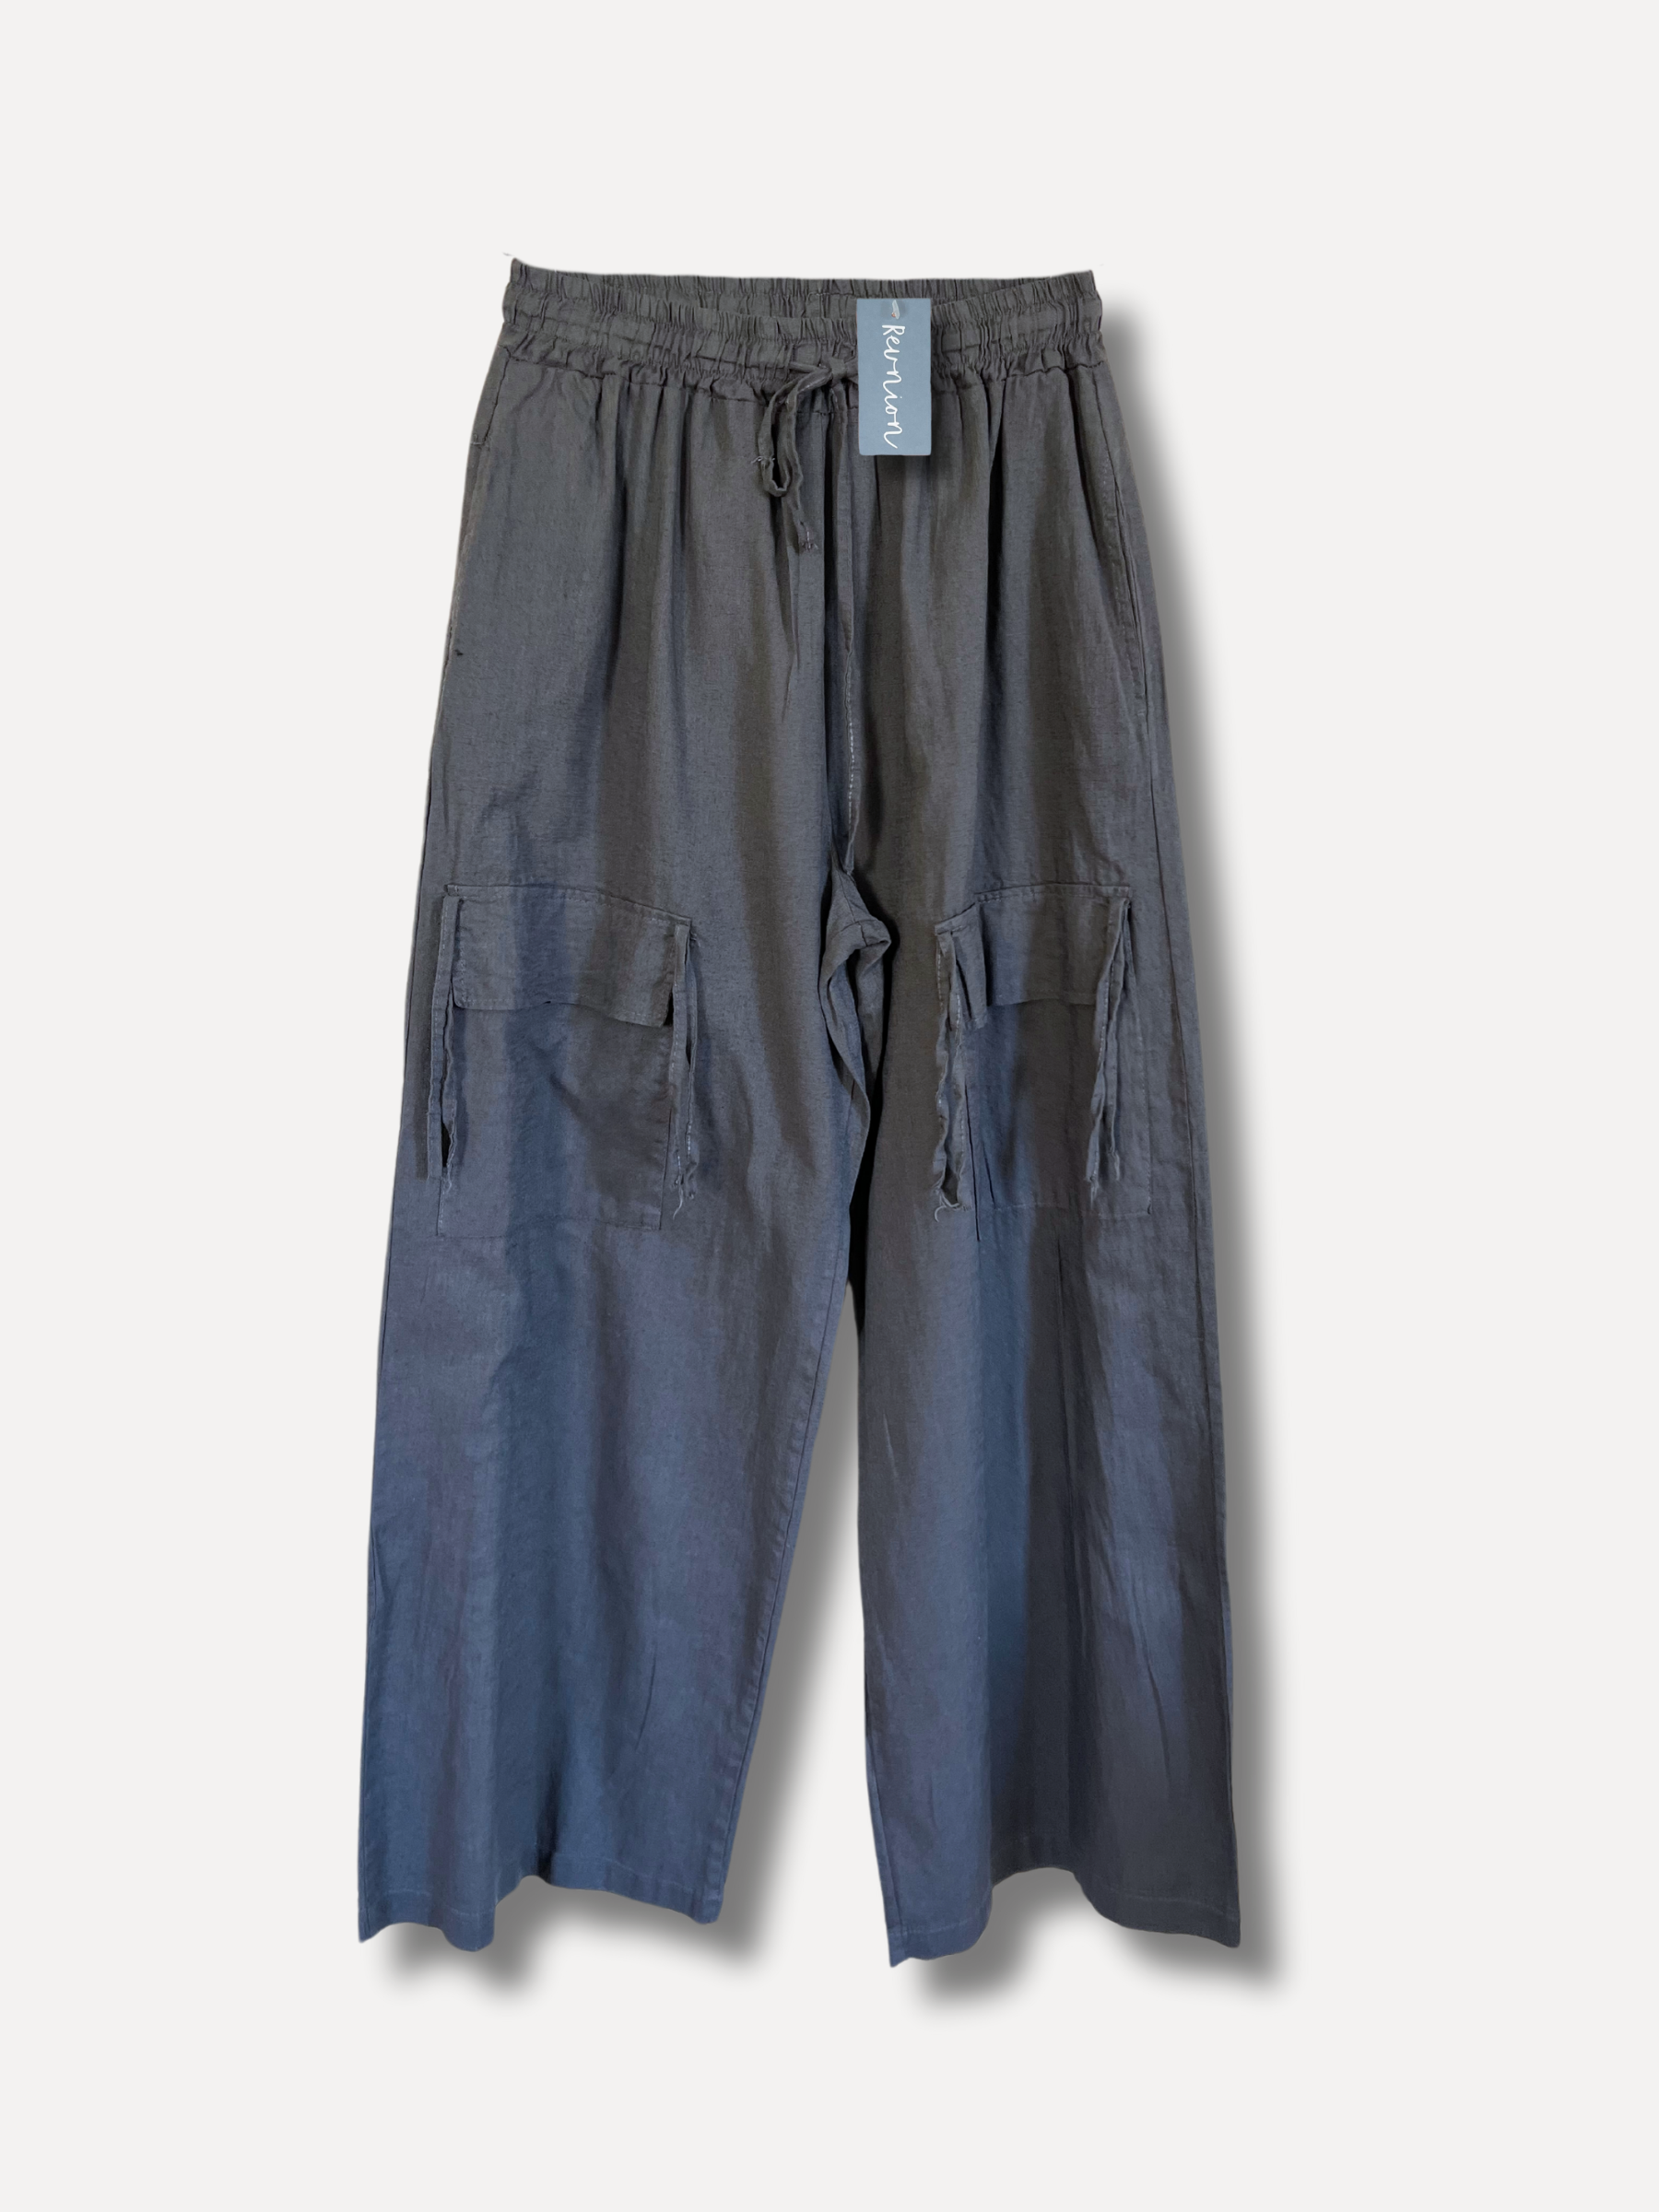 Dolce cargo pants